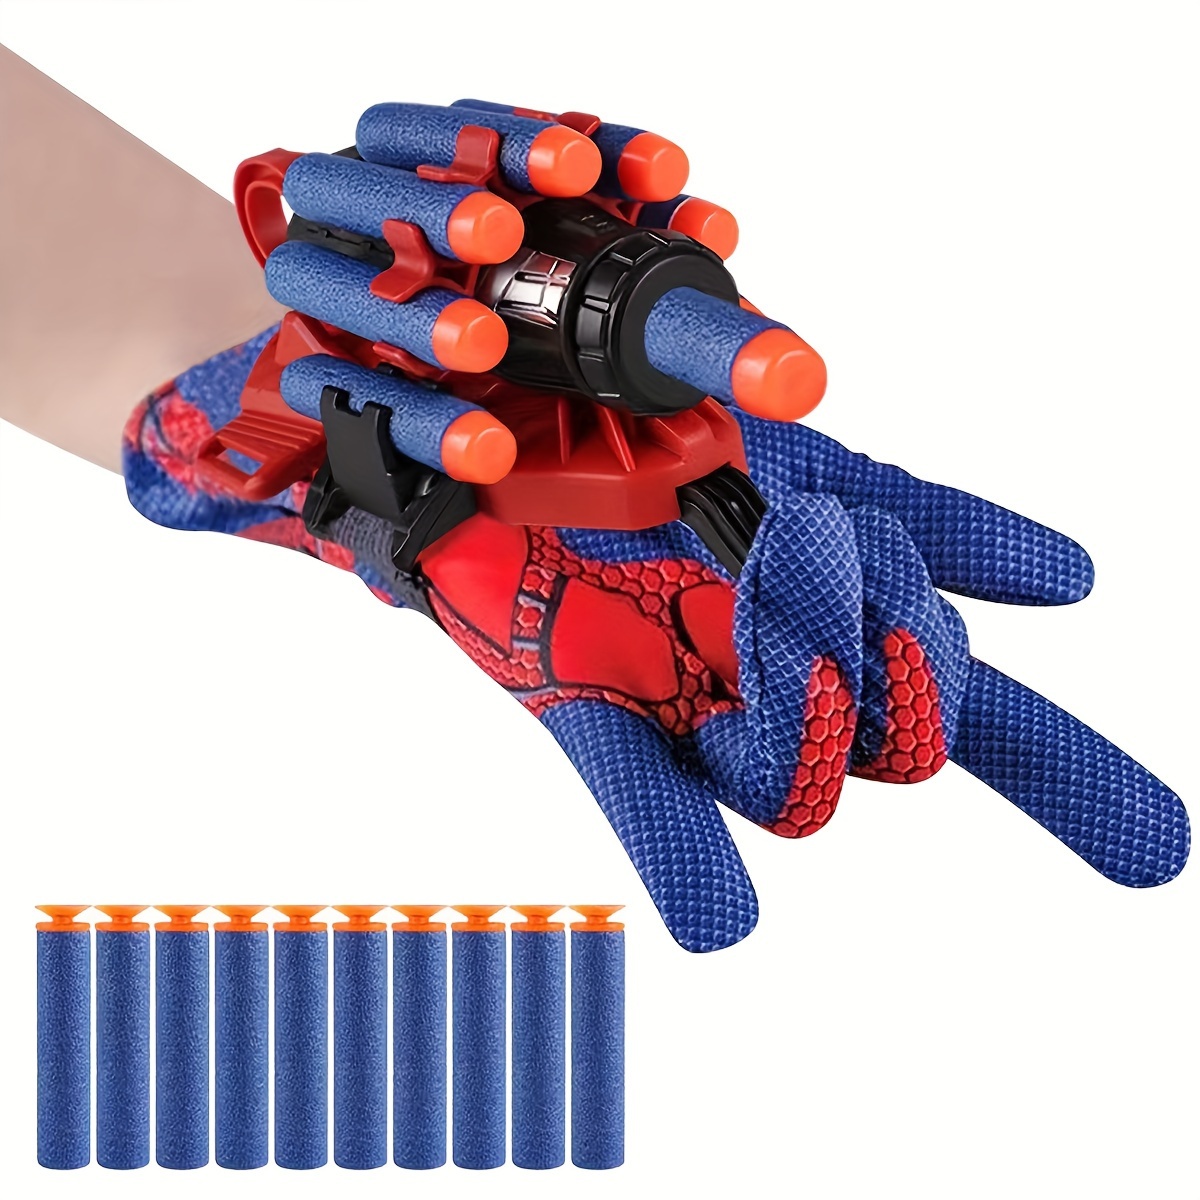 

20 Bullets Wristwatch Launcher Toy Role-playing Accessories Props Gloves Children's Gifts Outdoor Toys 1pc Random Color